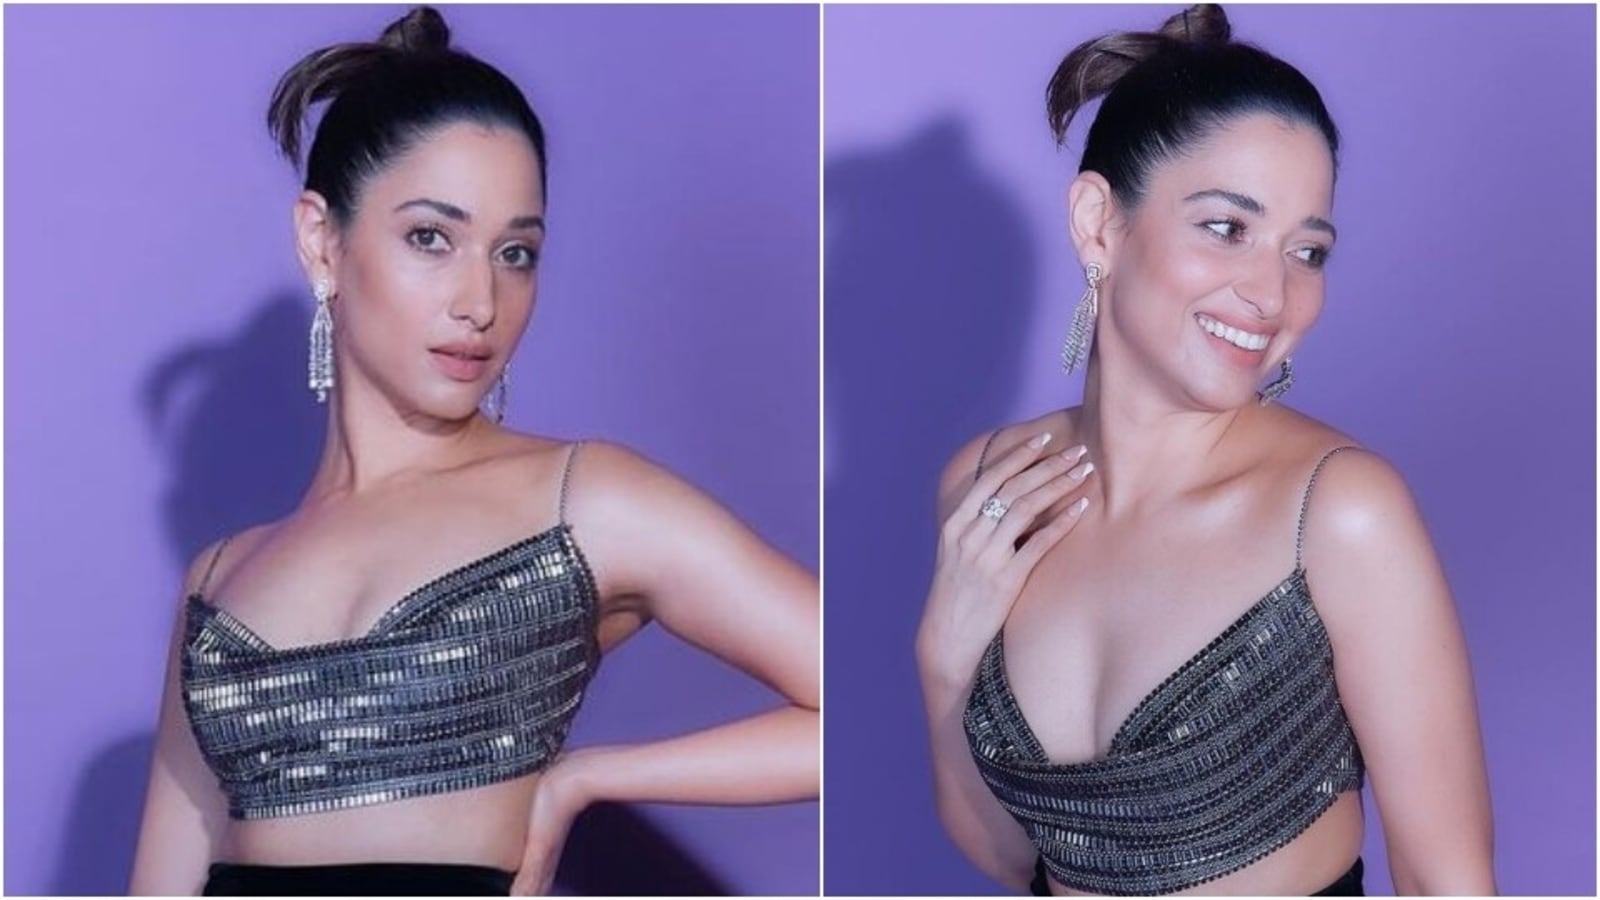 Xvideos Tamanna - Tamannaah Bhatia in bralette and thigh-slit skirt will make your heart skip  a beat | Fashion Trends - Hindustan Times